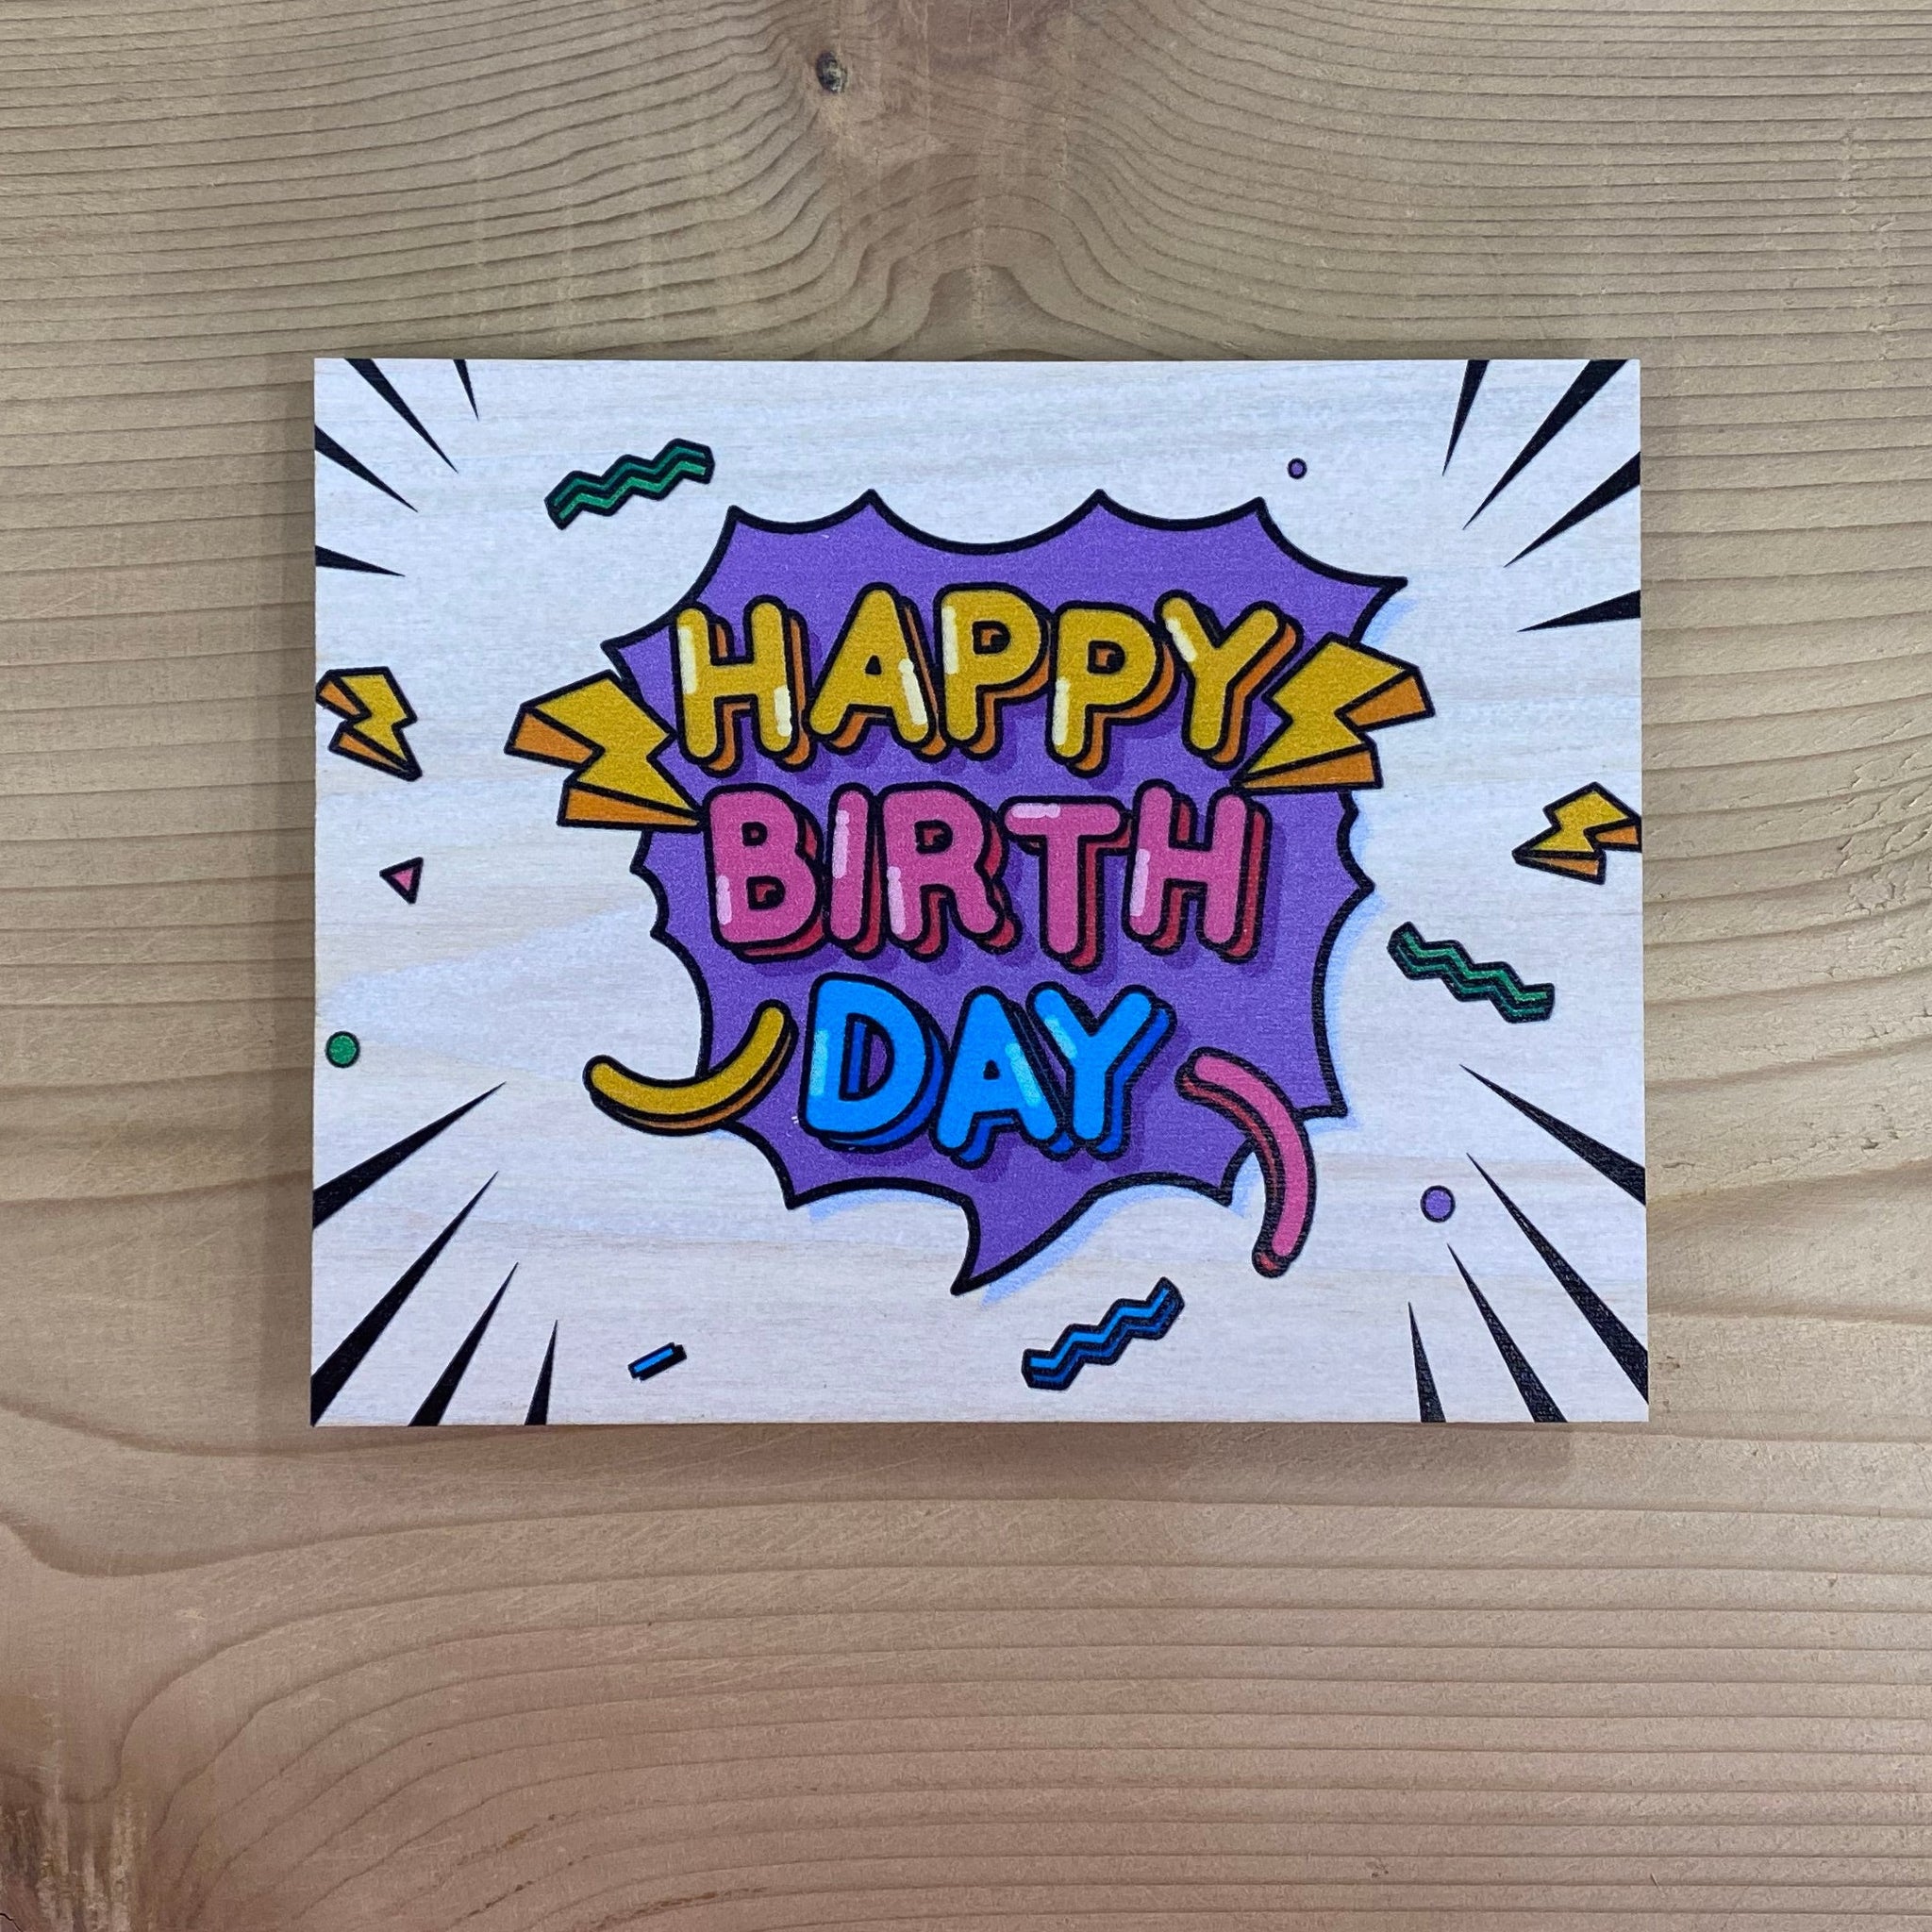 Woodly - Reclaimed Wood Greeting Cards